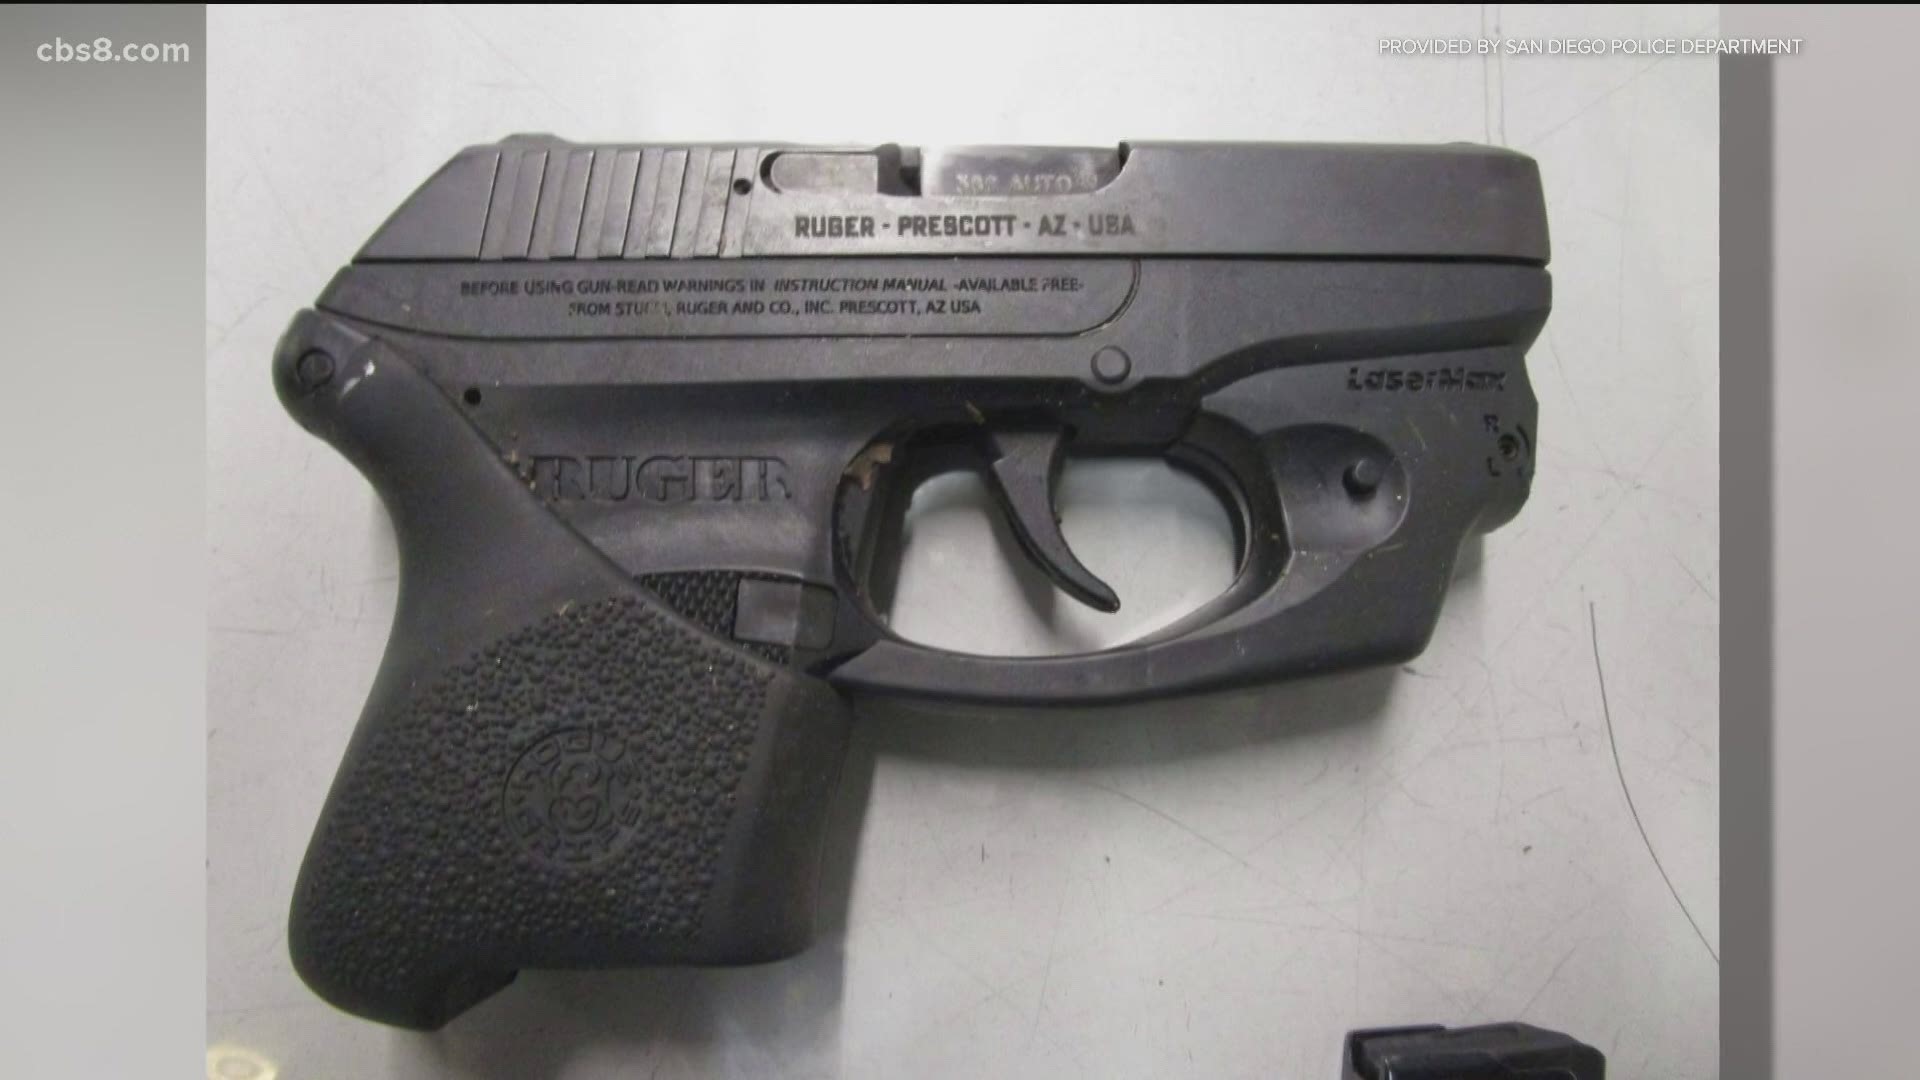 According to Chief Nisleit, nearly one in four are ghost guns, meaning they have no serial number, making them untraceable.